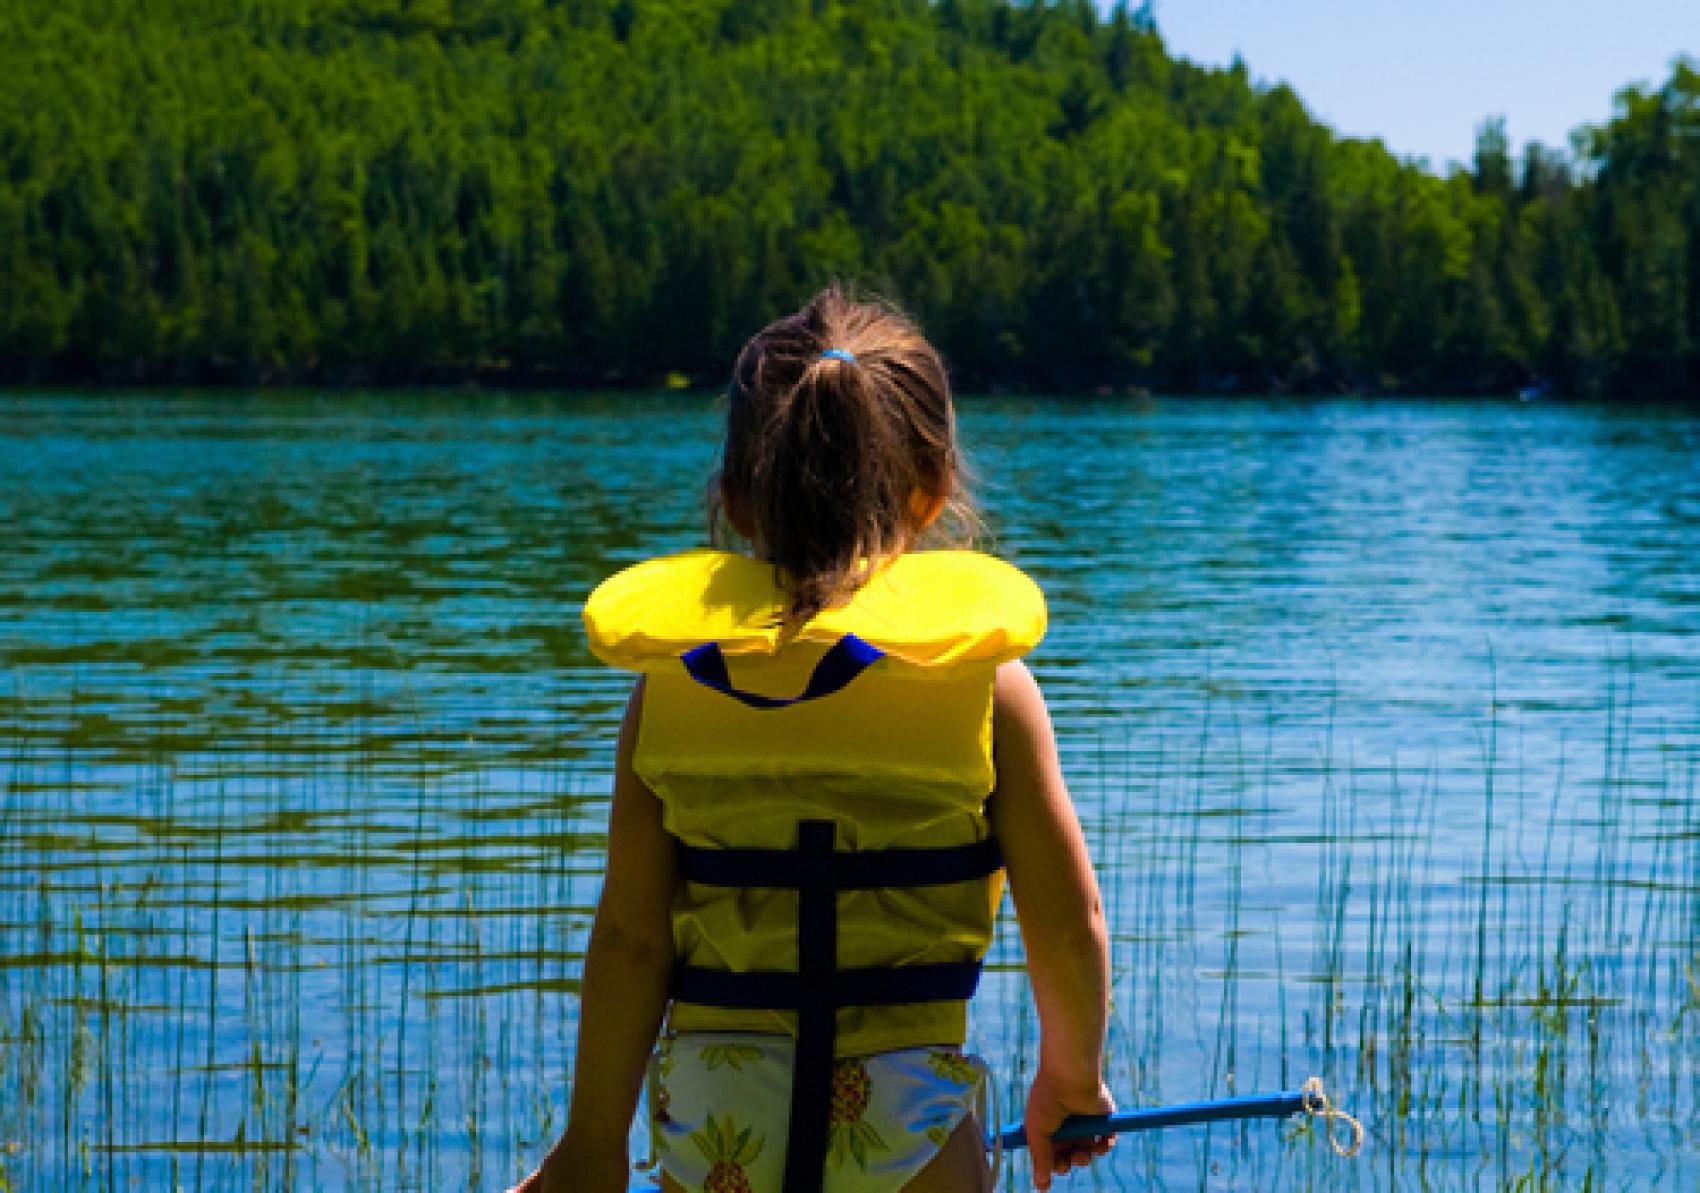 Girl in Lifejacket By Lake